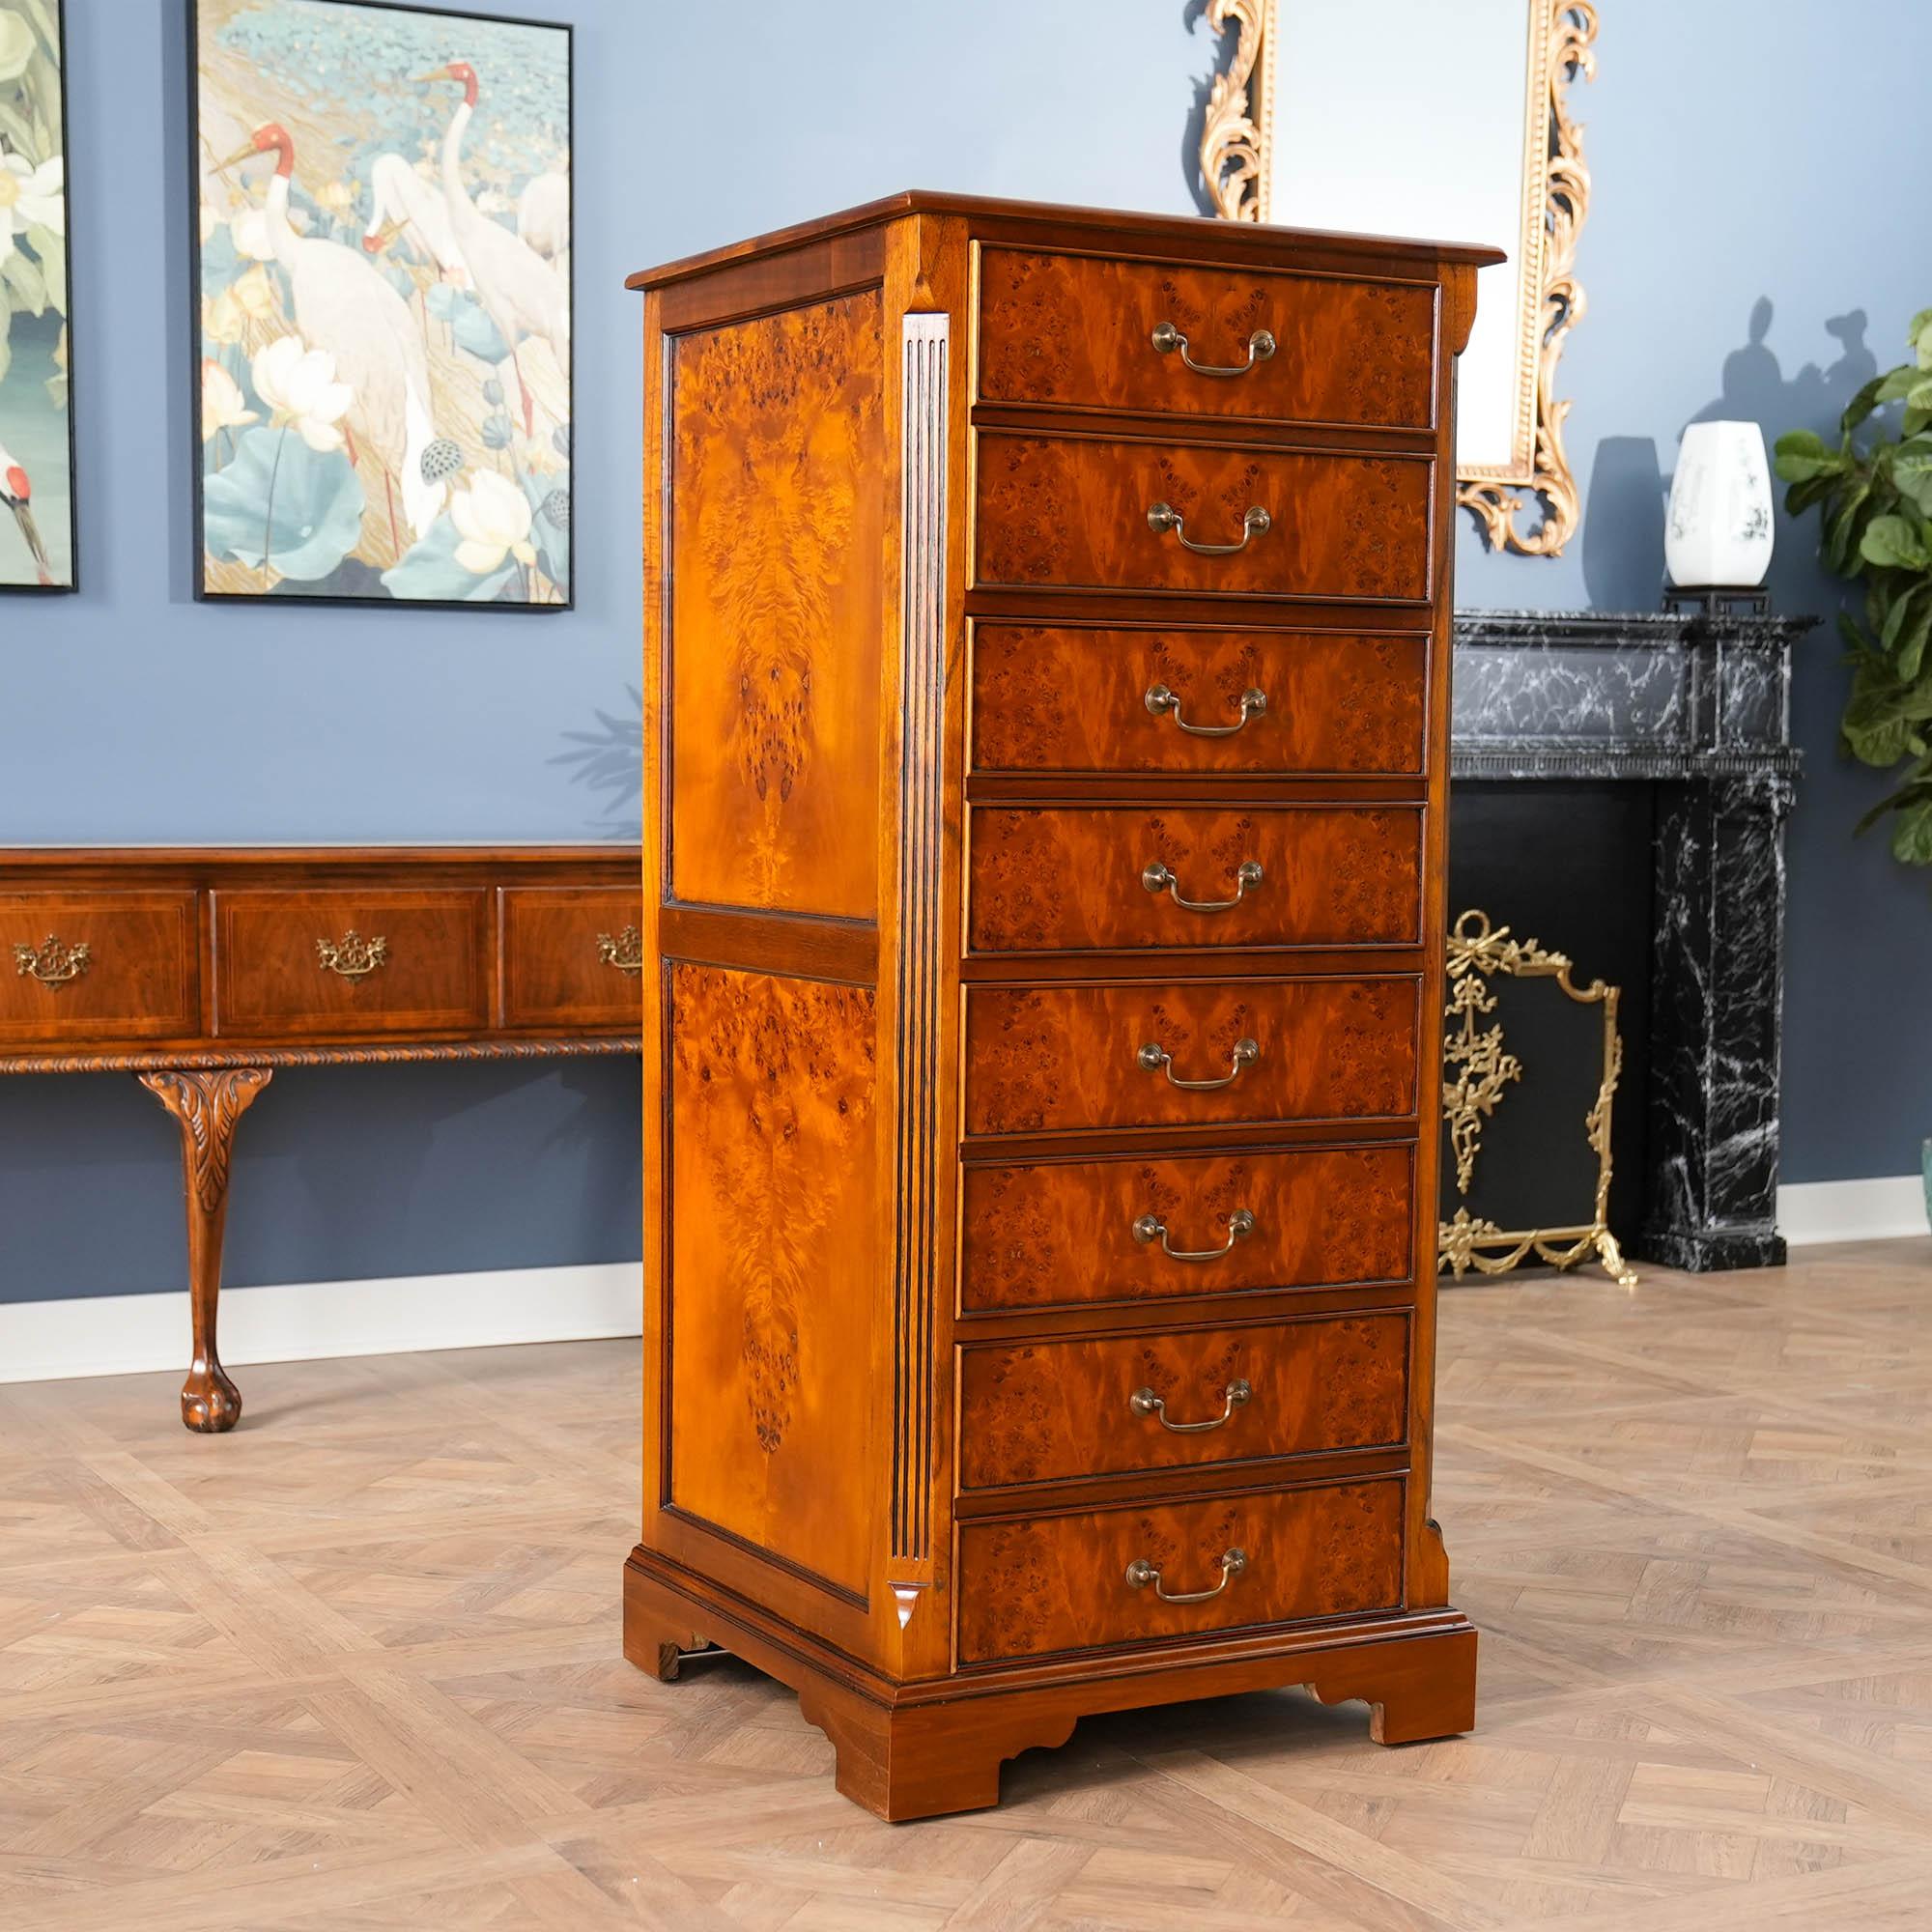 A superb piece of craftsmanship this high quality Country Estate Four Drawer File from Niagara Furniture is made with figured burled wood. The edge of the top is a lovely shaped solid wooden molding. In the front are eight faux drawers, each having